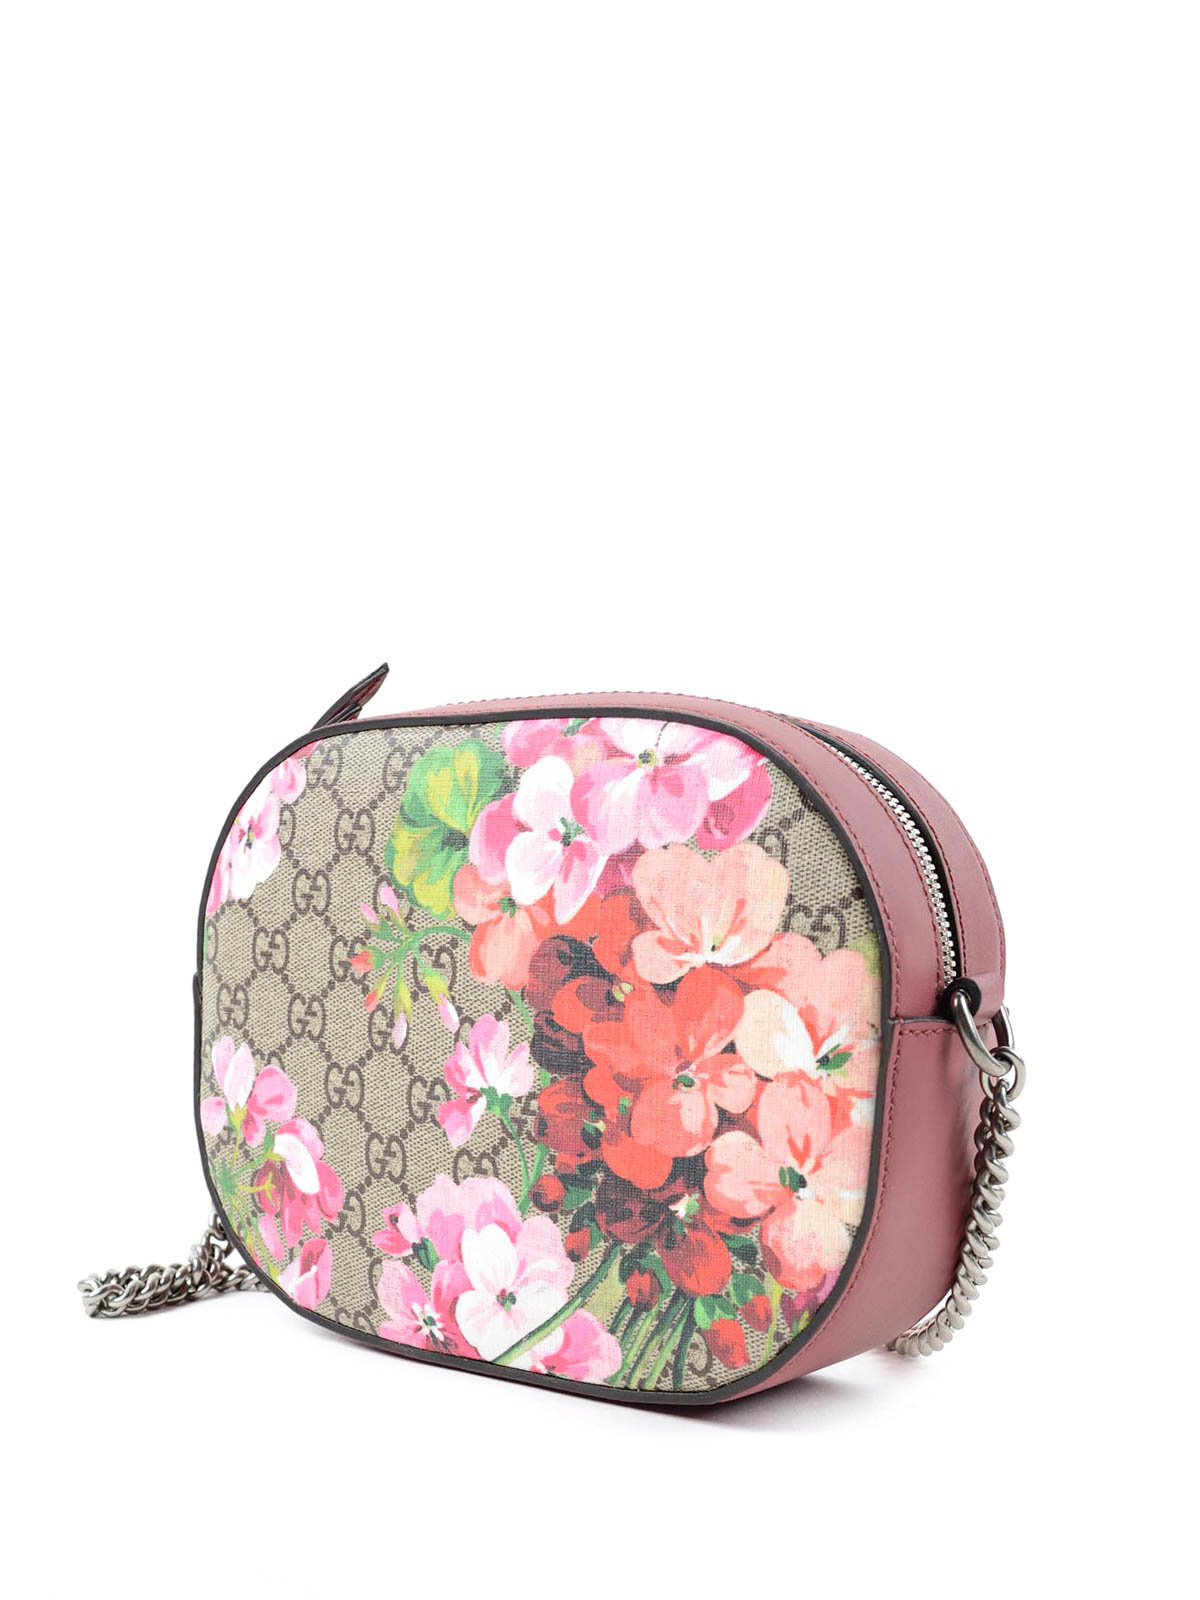 gucci blooms chain bag